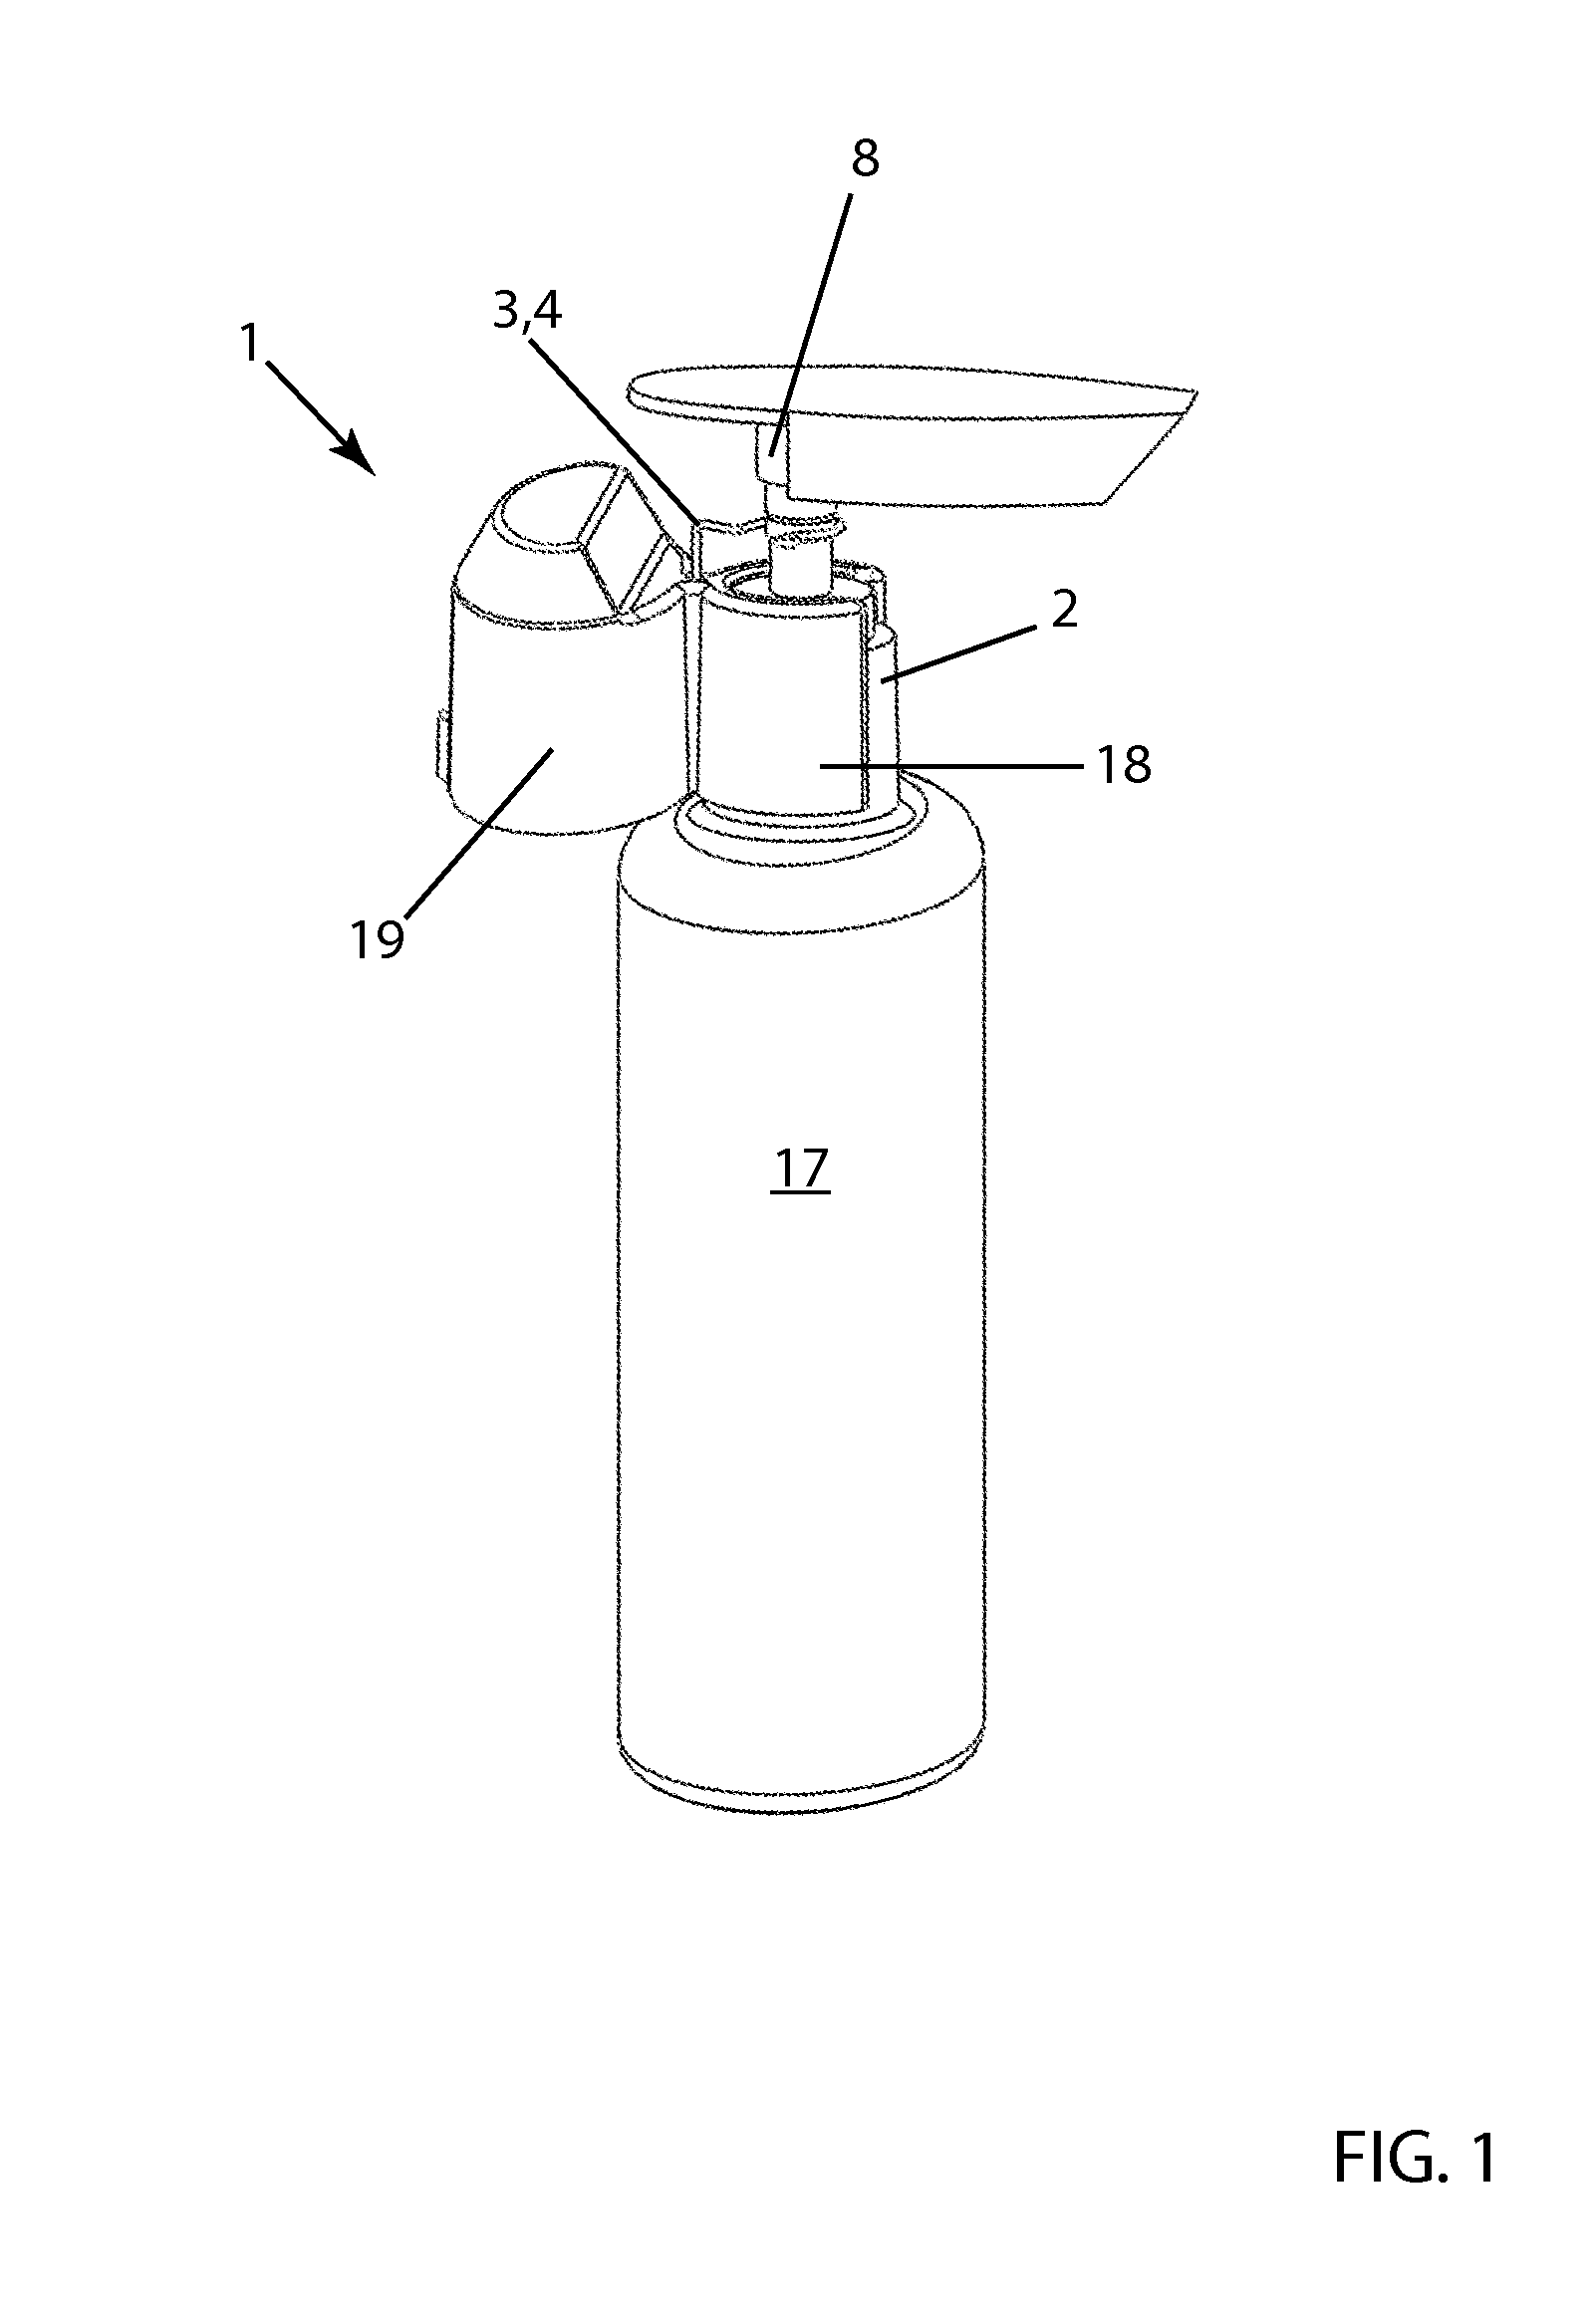 Actuator Sensor Apparatus for a Dispenser Bottle for Wireless Automatic Reporting of Dispenser Usage